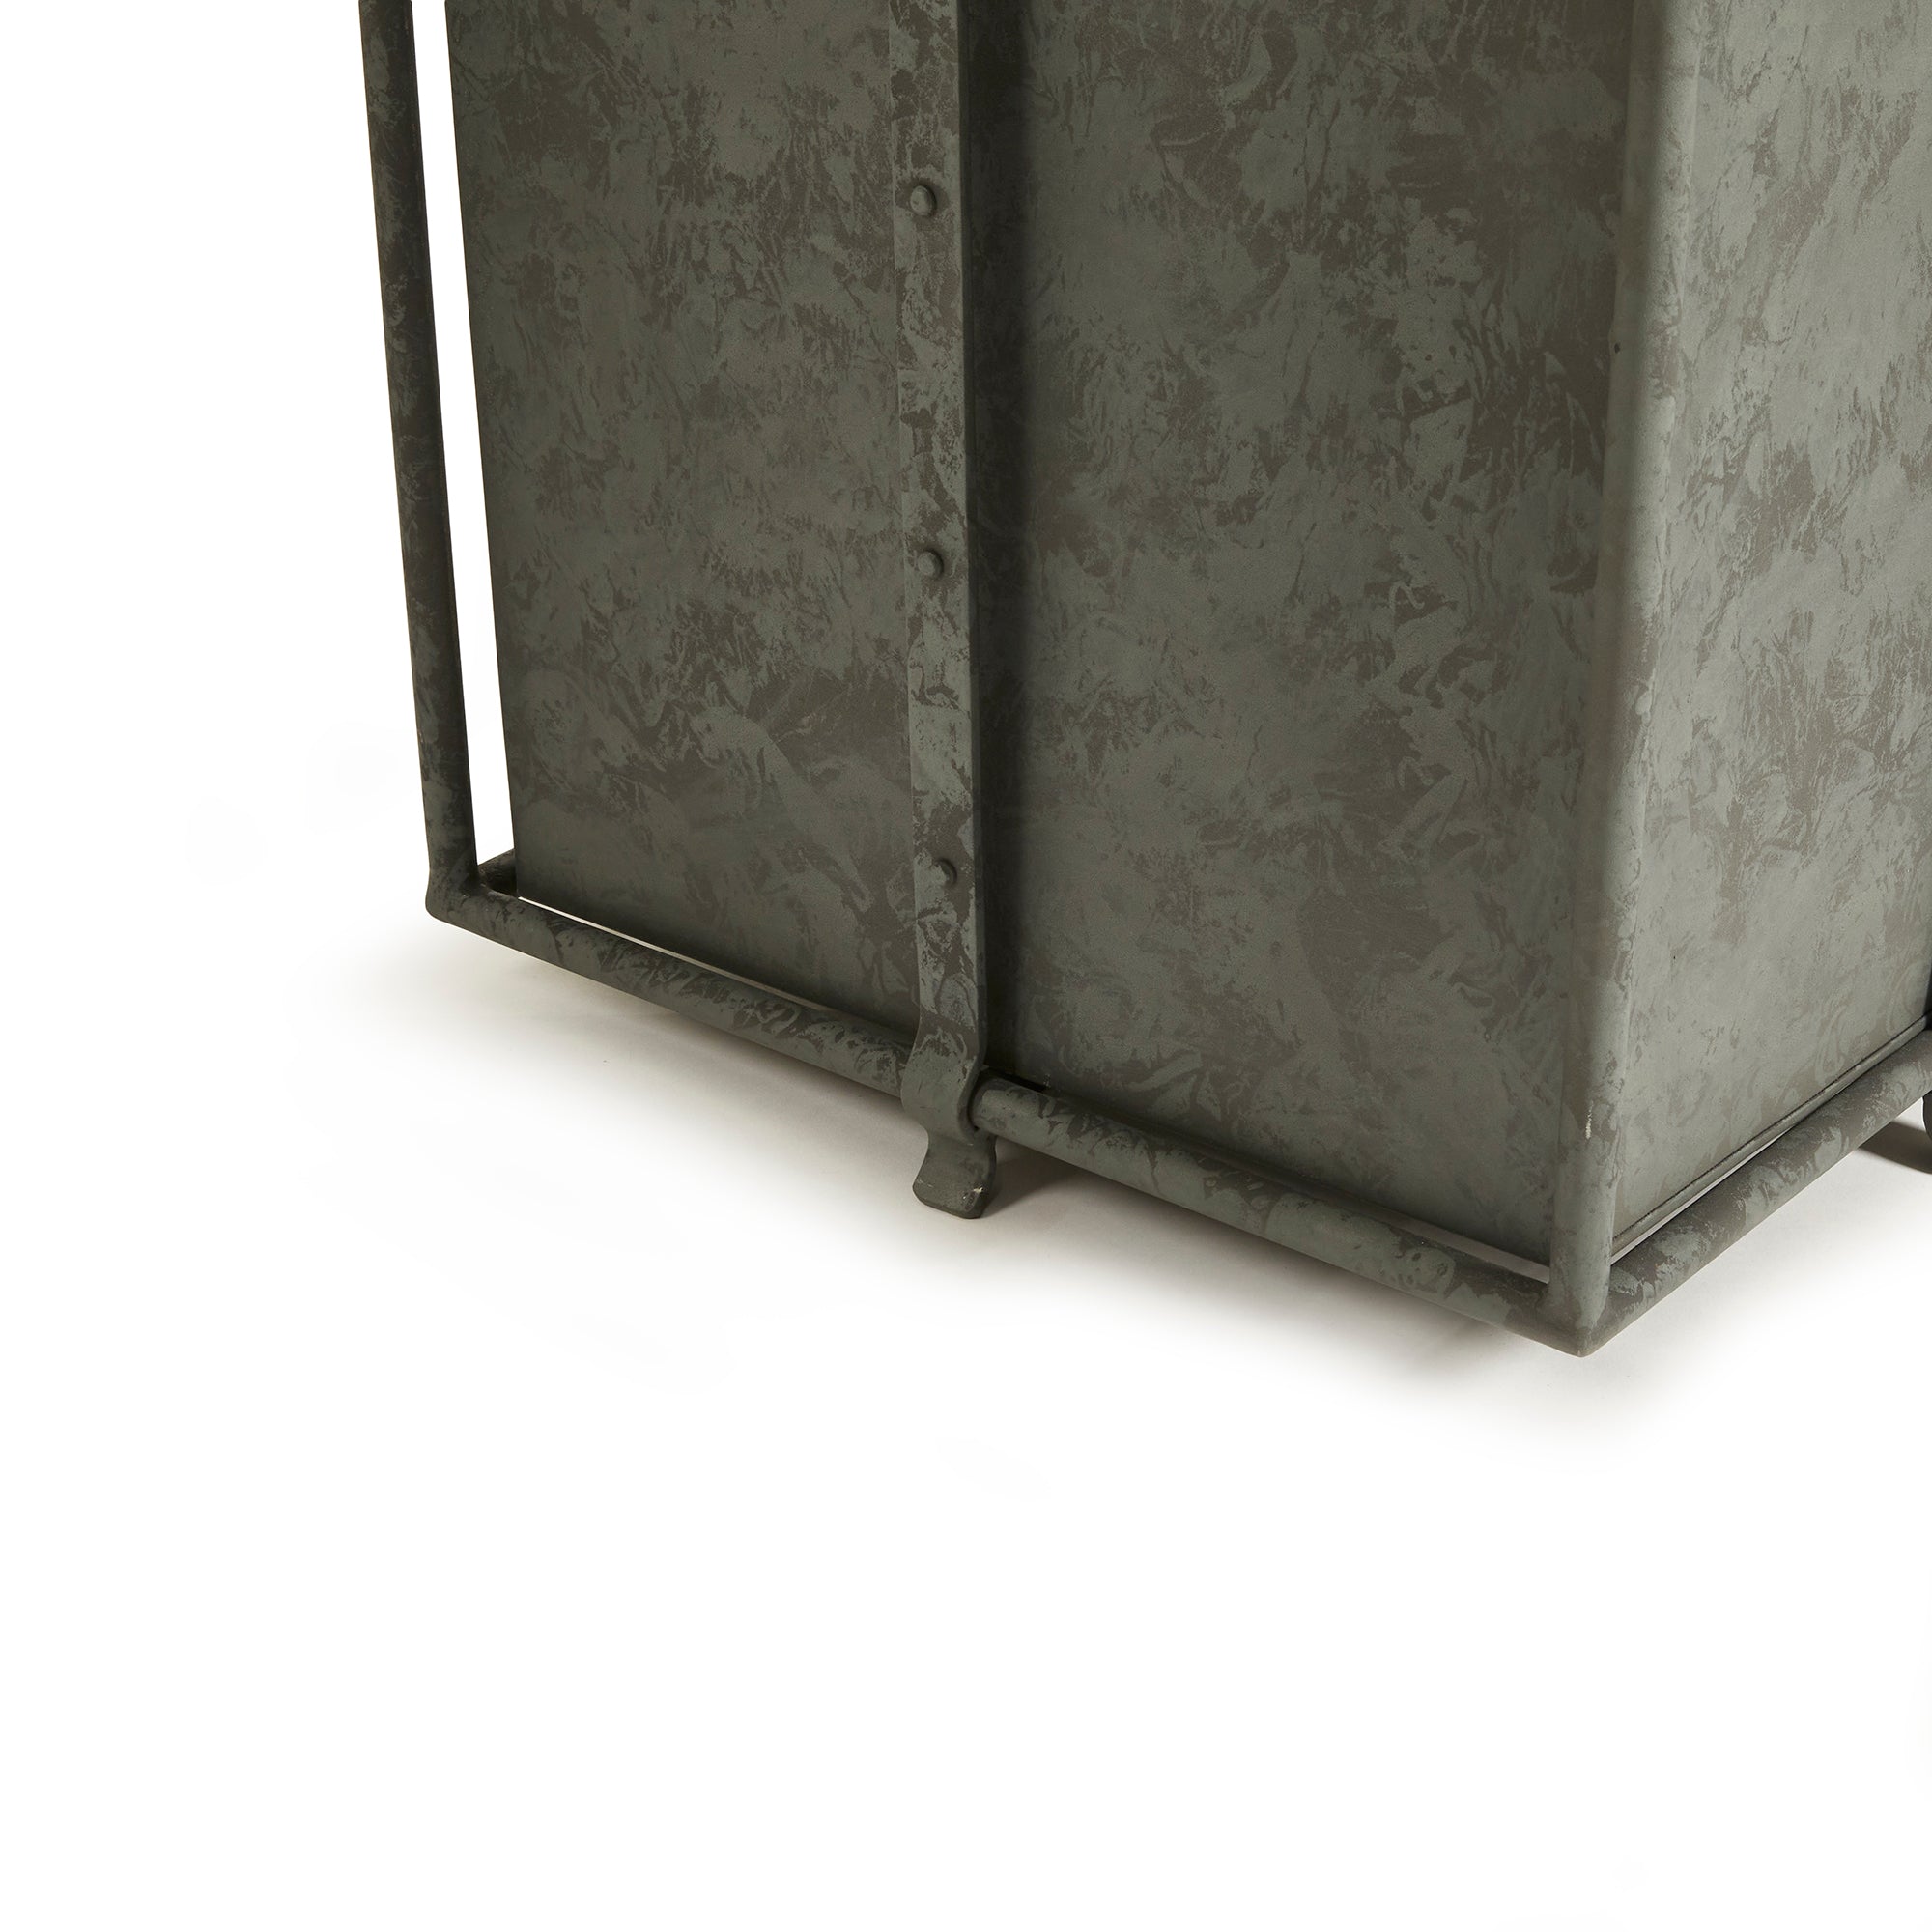 With metal liners that easily slide out, the Callahan Square Planter is as practical as it is handsome. The rounded handles and traditional design make it an outdoor classic. Amethyst Home provides interior design, new construction, custom furniture, and area rugs in the Salt Lake City metro area.